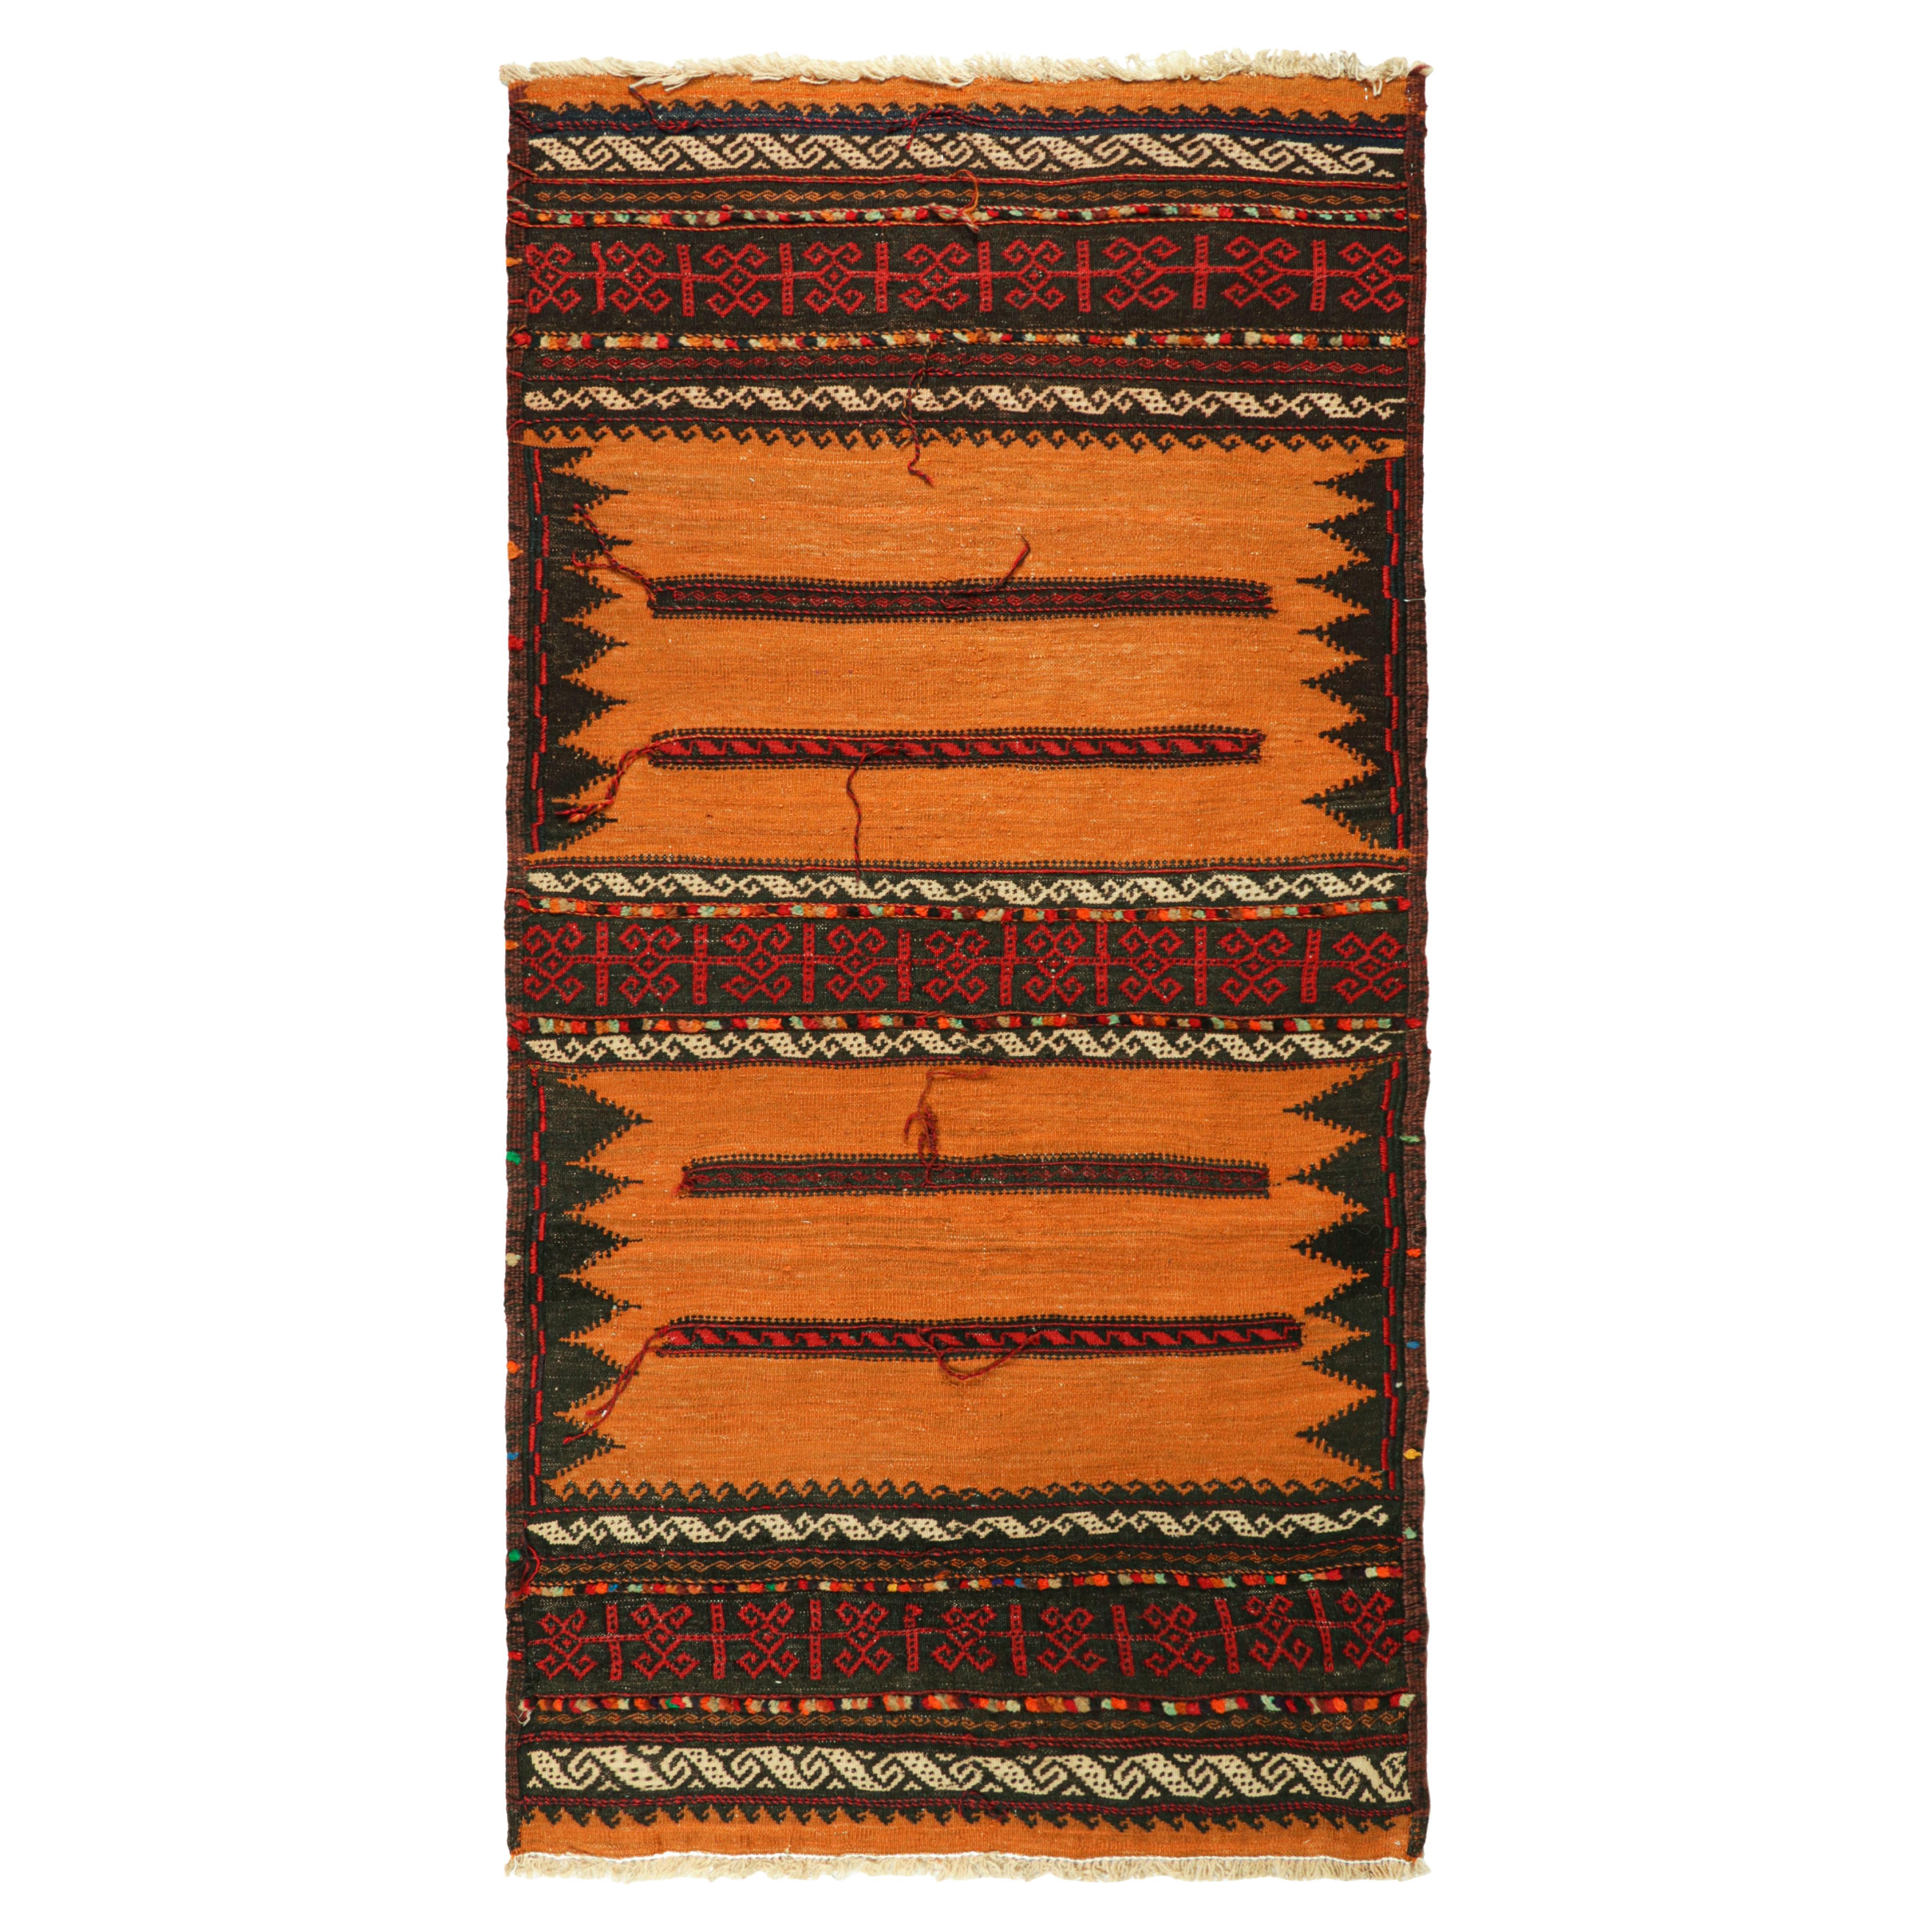 Vintage Afghan Kilim in Rust, with Polychromatic Patterns, from Rug & Kilim For Sale